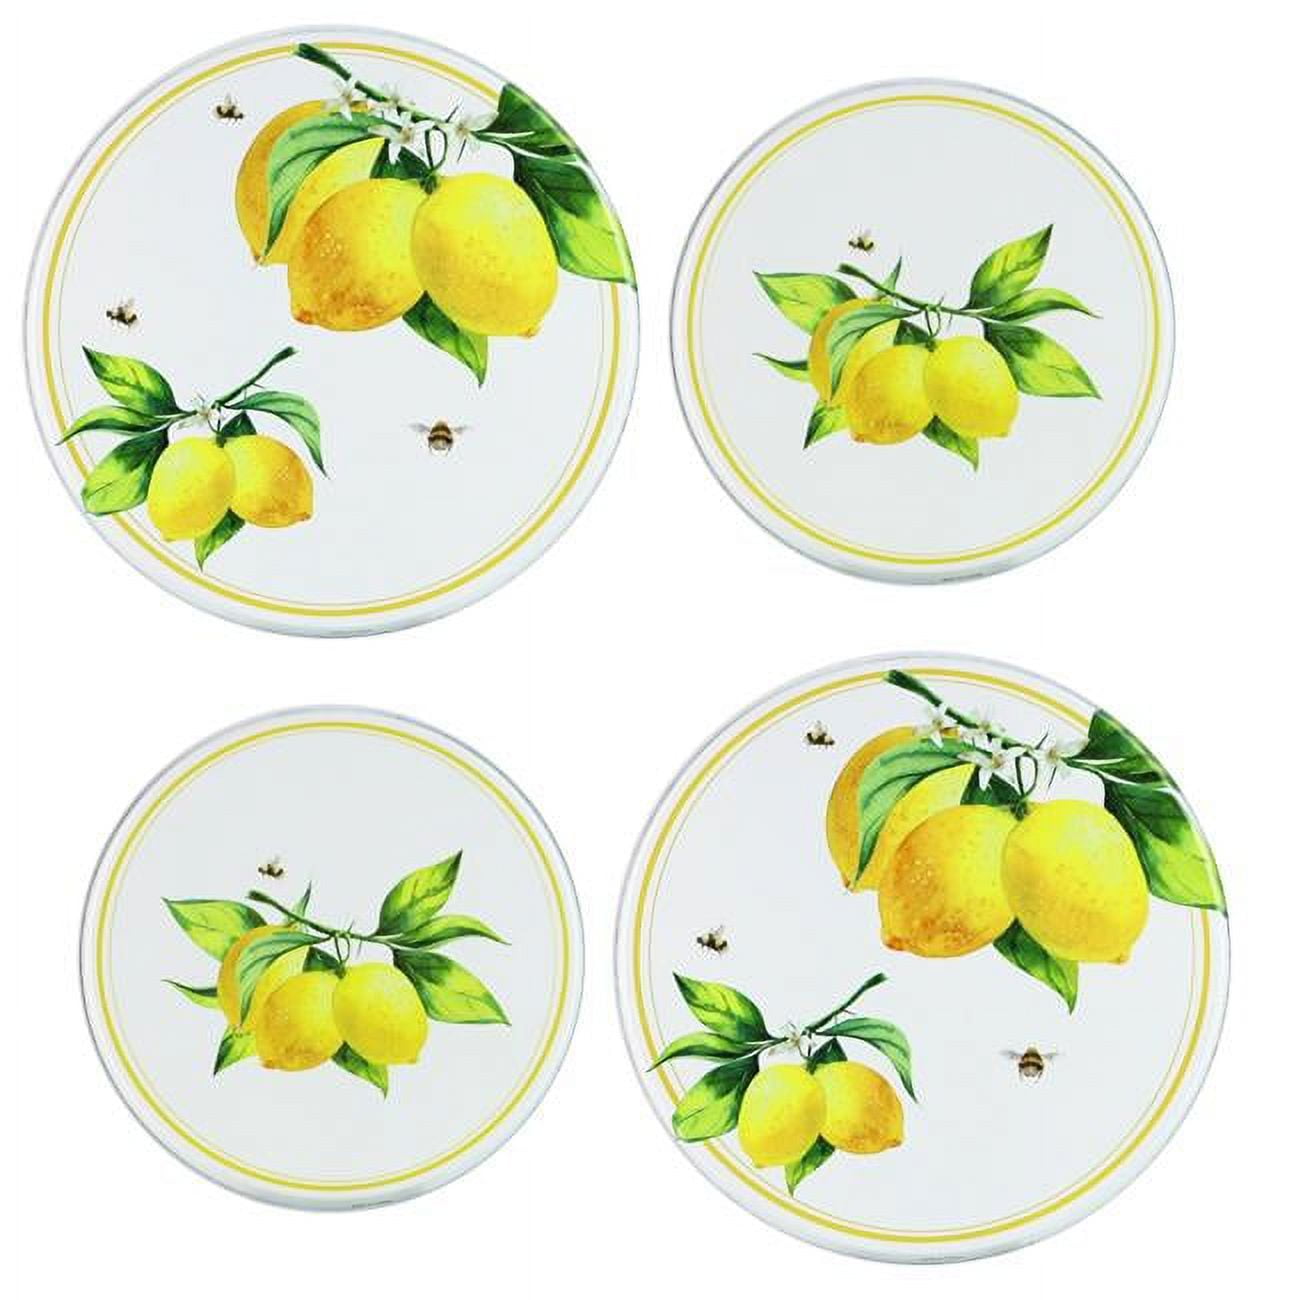 Reston Lloyd Electric Stove Burner Covers, Set of 4, A Perfect Day